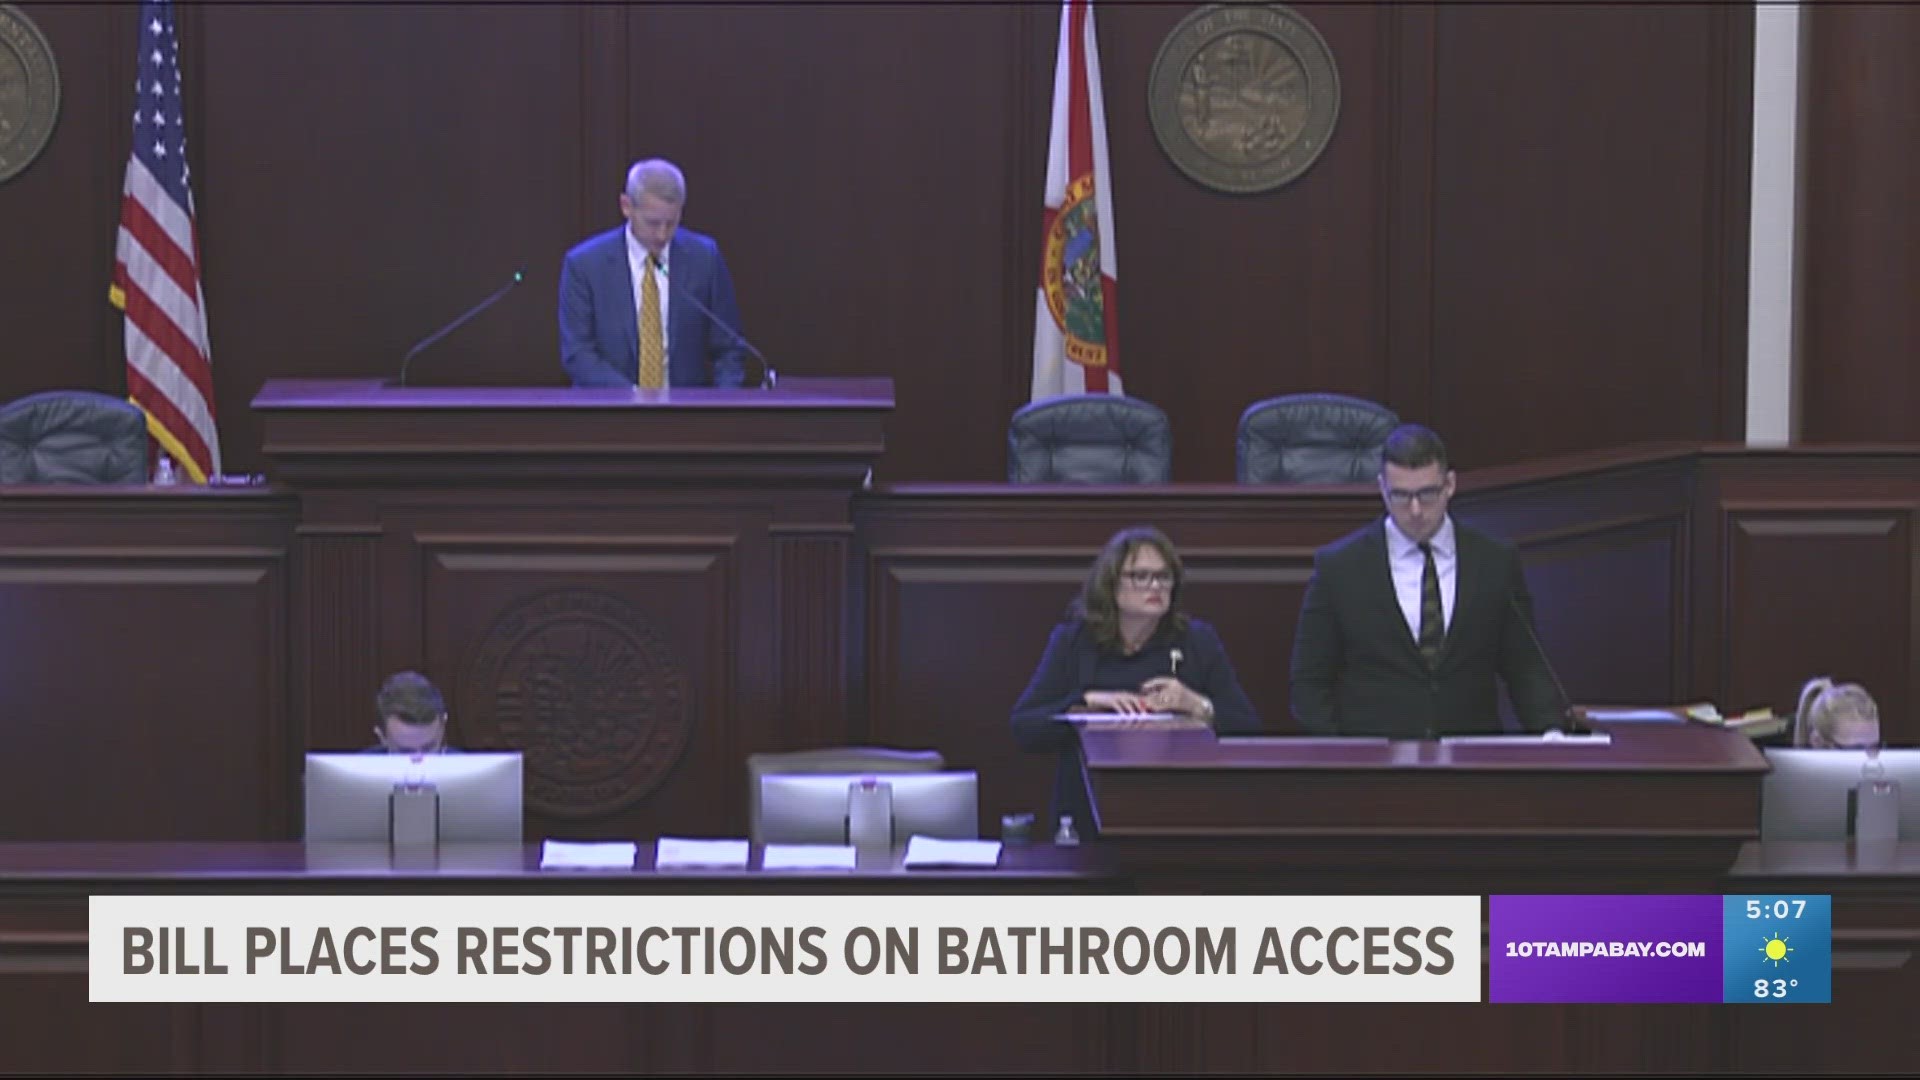 The bill, HB 1521, would prohibit people from using restrooms designated for the opposite sex.